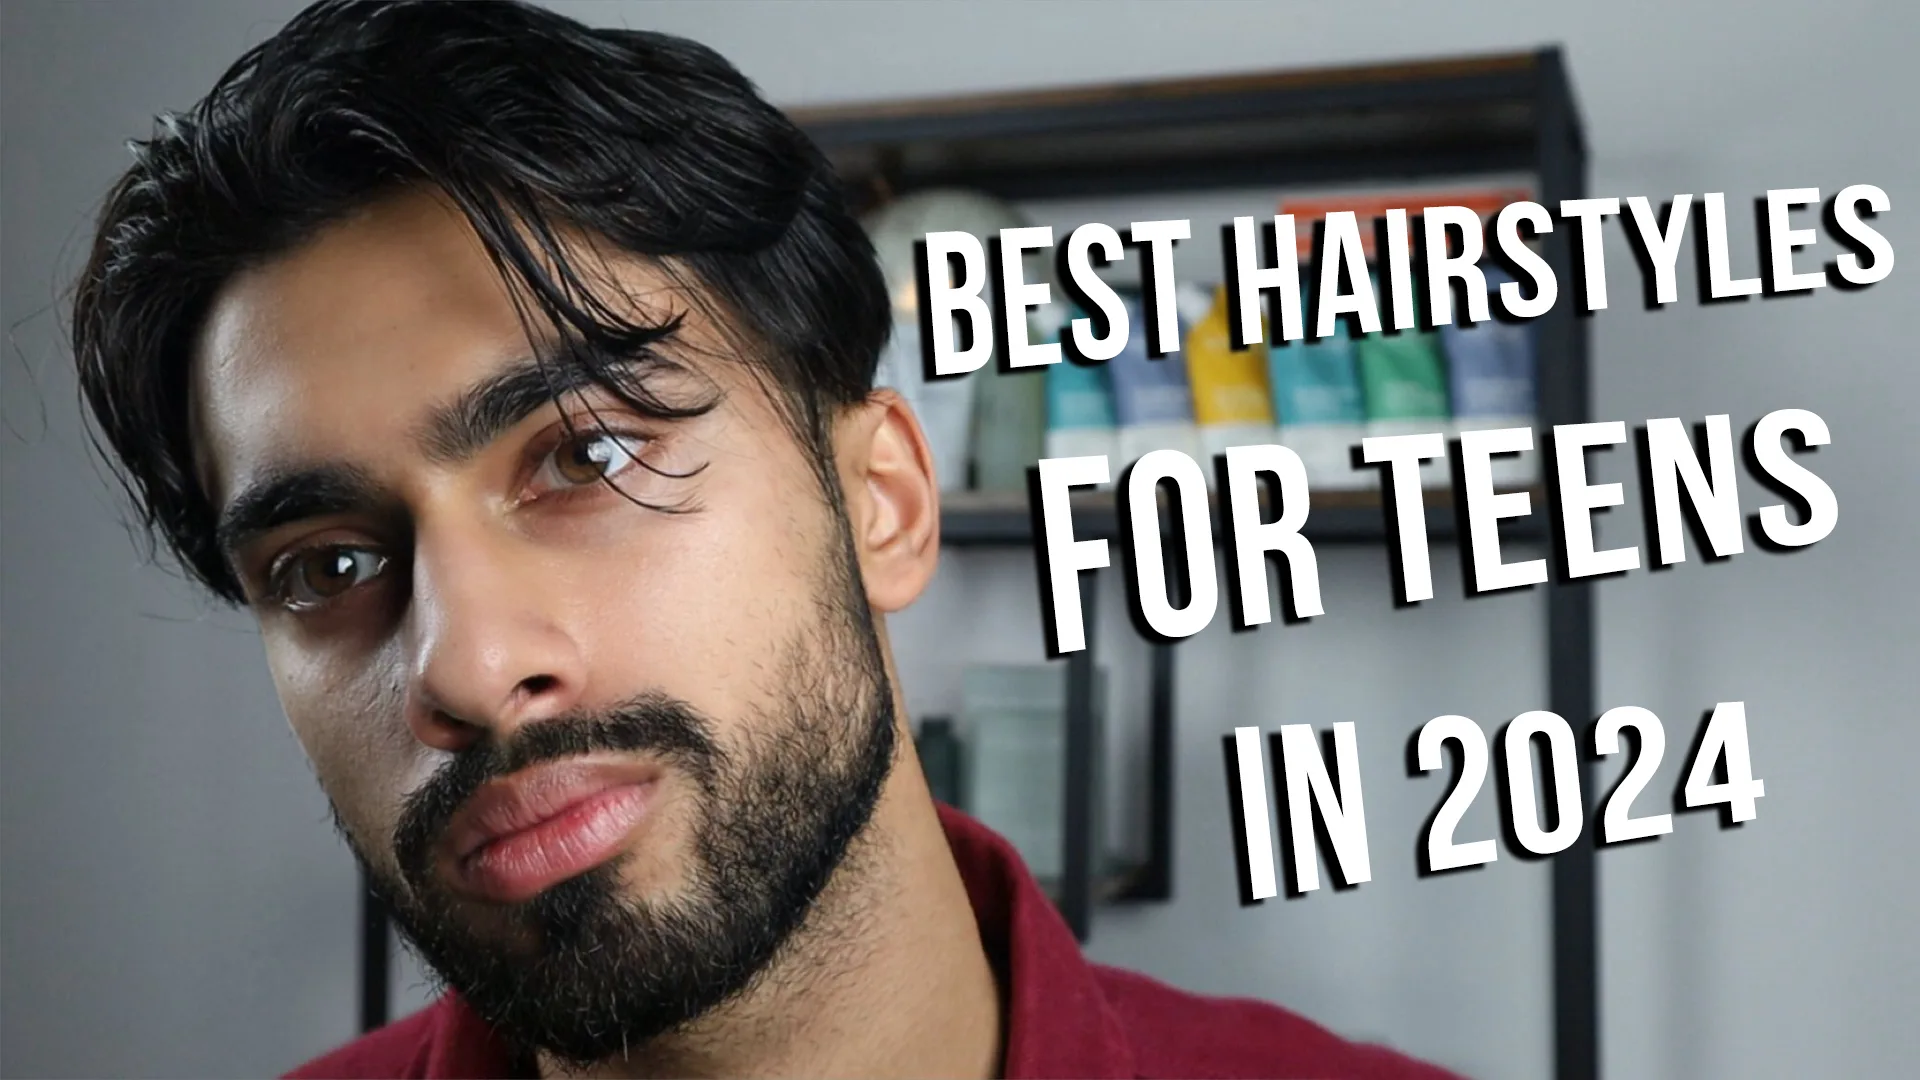 Best Hairstyles for Teens in 2024